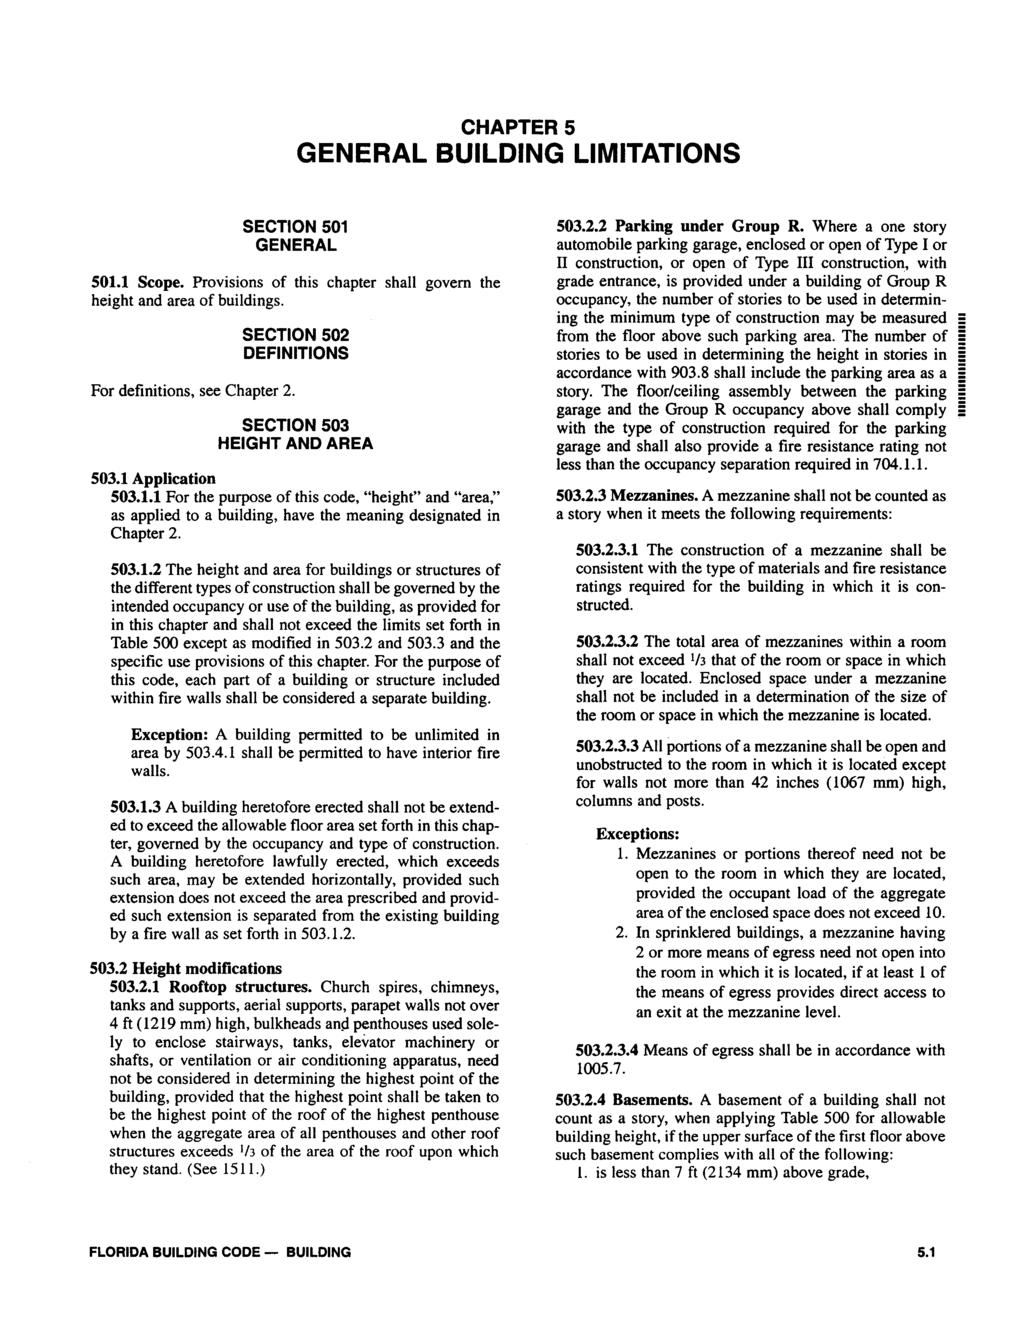 CHAPTER GENERAL BUILDING LIMITATIONS SECTION 0 GENERAL 0. Scope. Provisions of tis capter sall govern te eigt and area of buildings. For definitions, see Capter.